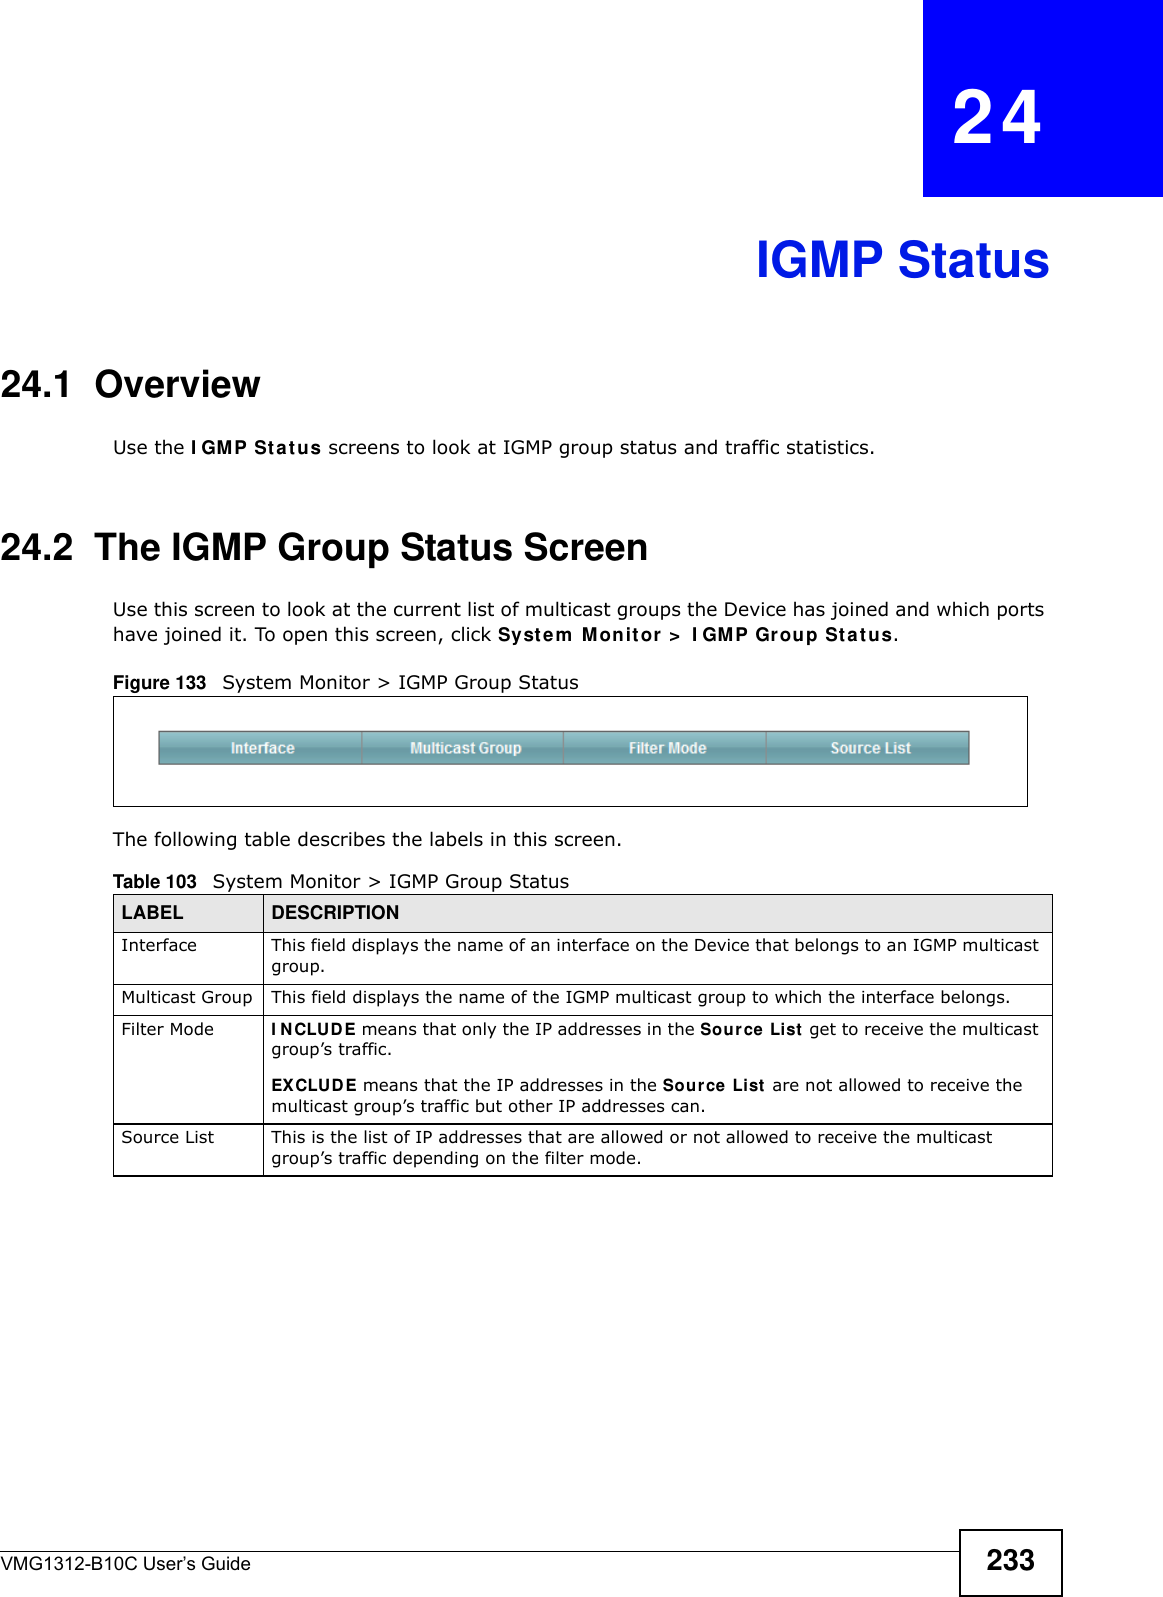 VMG1312-B10C User’s Guide 233CHAPTER   24IGMP Status24.1  OverviewUse the I GM P St a t us screens to look at IGMP group status and traffic statistics. 24.2  The IGMP Group Status ScreenUse this screen to look at the current list of multicast groups the Device has joined and which ports have joined it. To open this screen, click Syst e m  M onit or  &gt;  I GM P Gr ou p St a t us.Figure 133   System Monitor &gt; IGMP Group StatusThe following table describes the labels in this screen.Table 103   System Monitor &gt; IGMP Group StatusLABEL DESCRIPTIONInterface This field displays the name of an interface on the Device that belongs to an IGMP multicast group. Multicast Group This field displays the name of the IGMP multicast group to which the interface belongs. Filter Mode  I N CLUD E means that only the IP addresses in the Sour ce List get to receive the multicast group’s traffic.EXCLUD E means that the IP addresses in the Sou rce  List are not allowed to receive the multicast group’s traffic but other IP addresses can.Source List This is the list of IP addresses that are allowed or not allowed to receive the multicast group’s traffic depending on the filter mode.